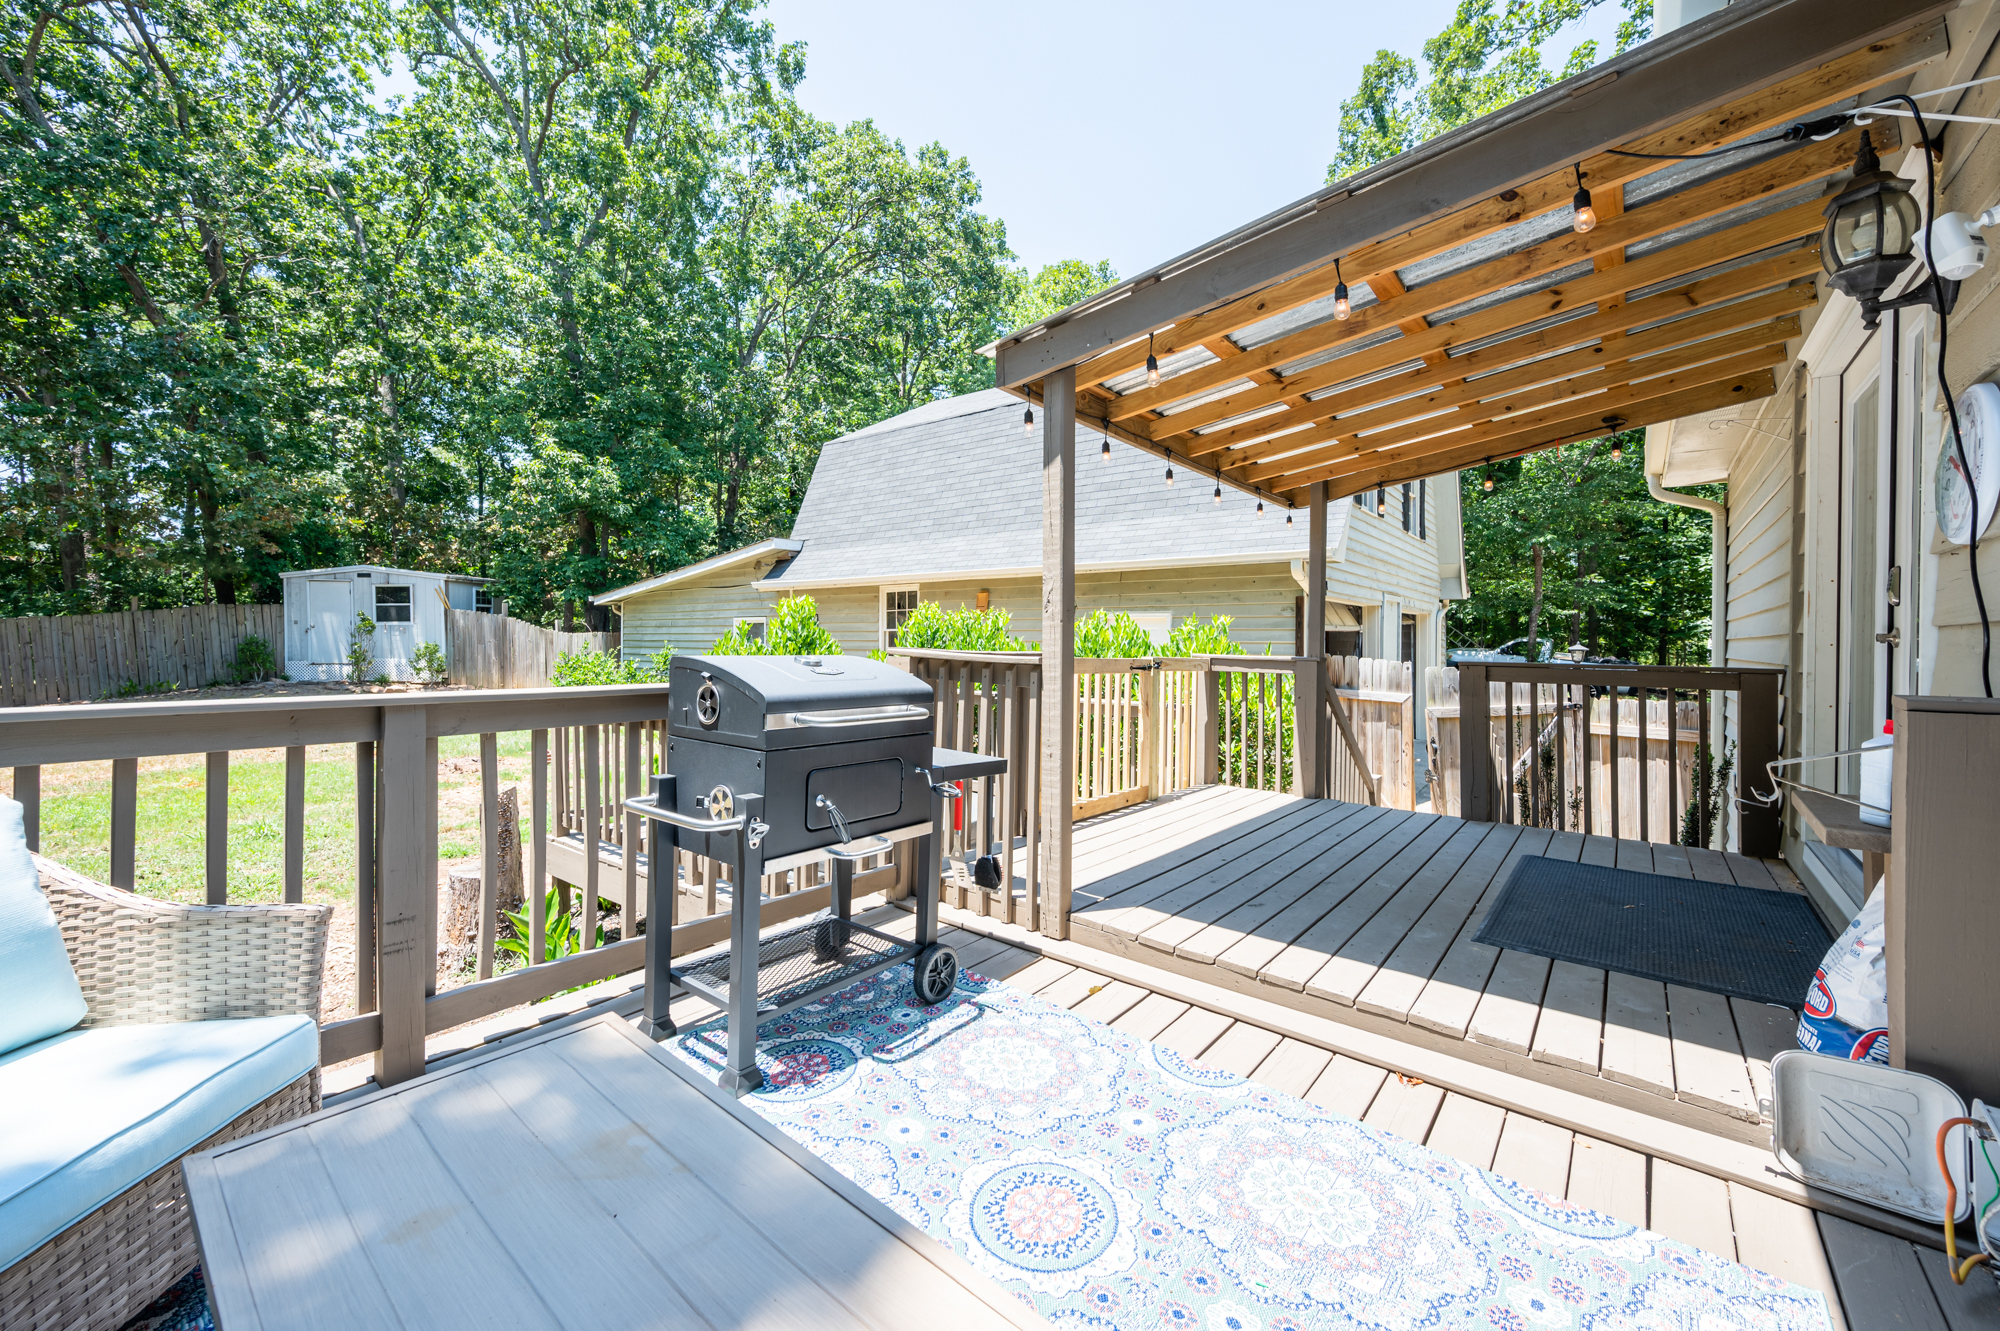 Cabin Style Stay With Patio, Grill & Porch Swing